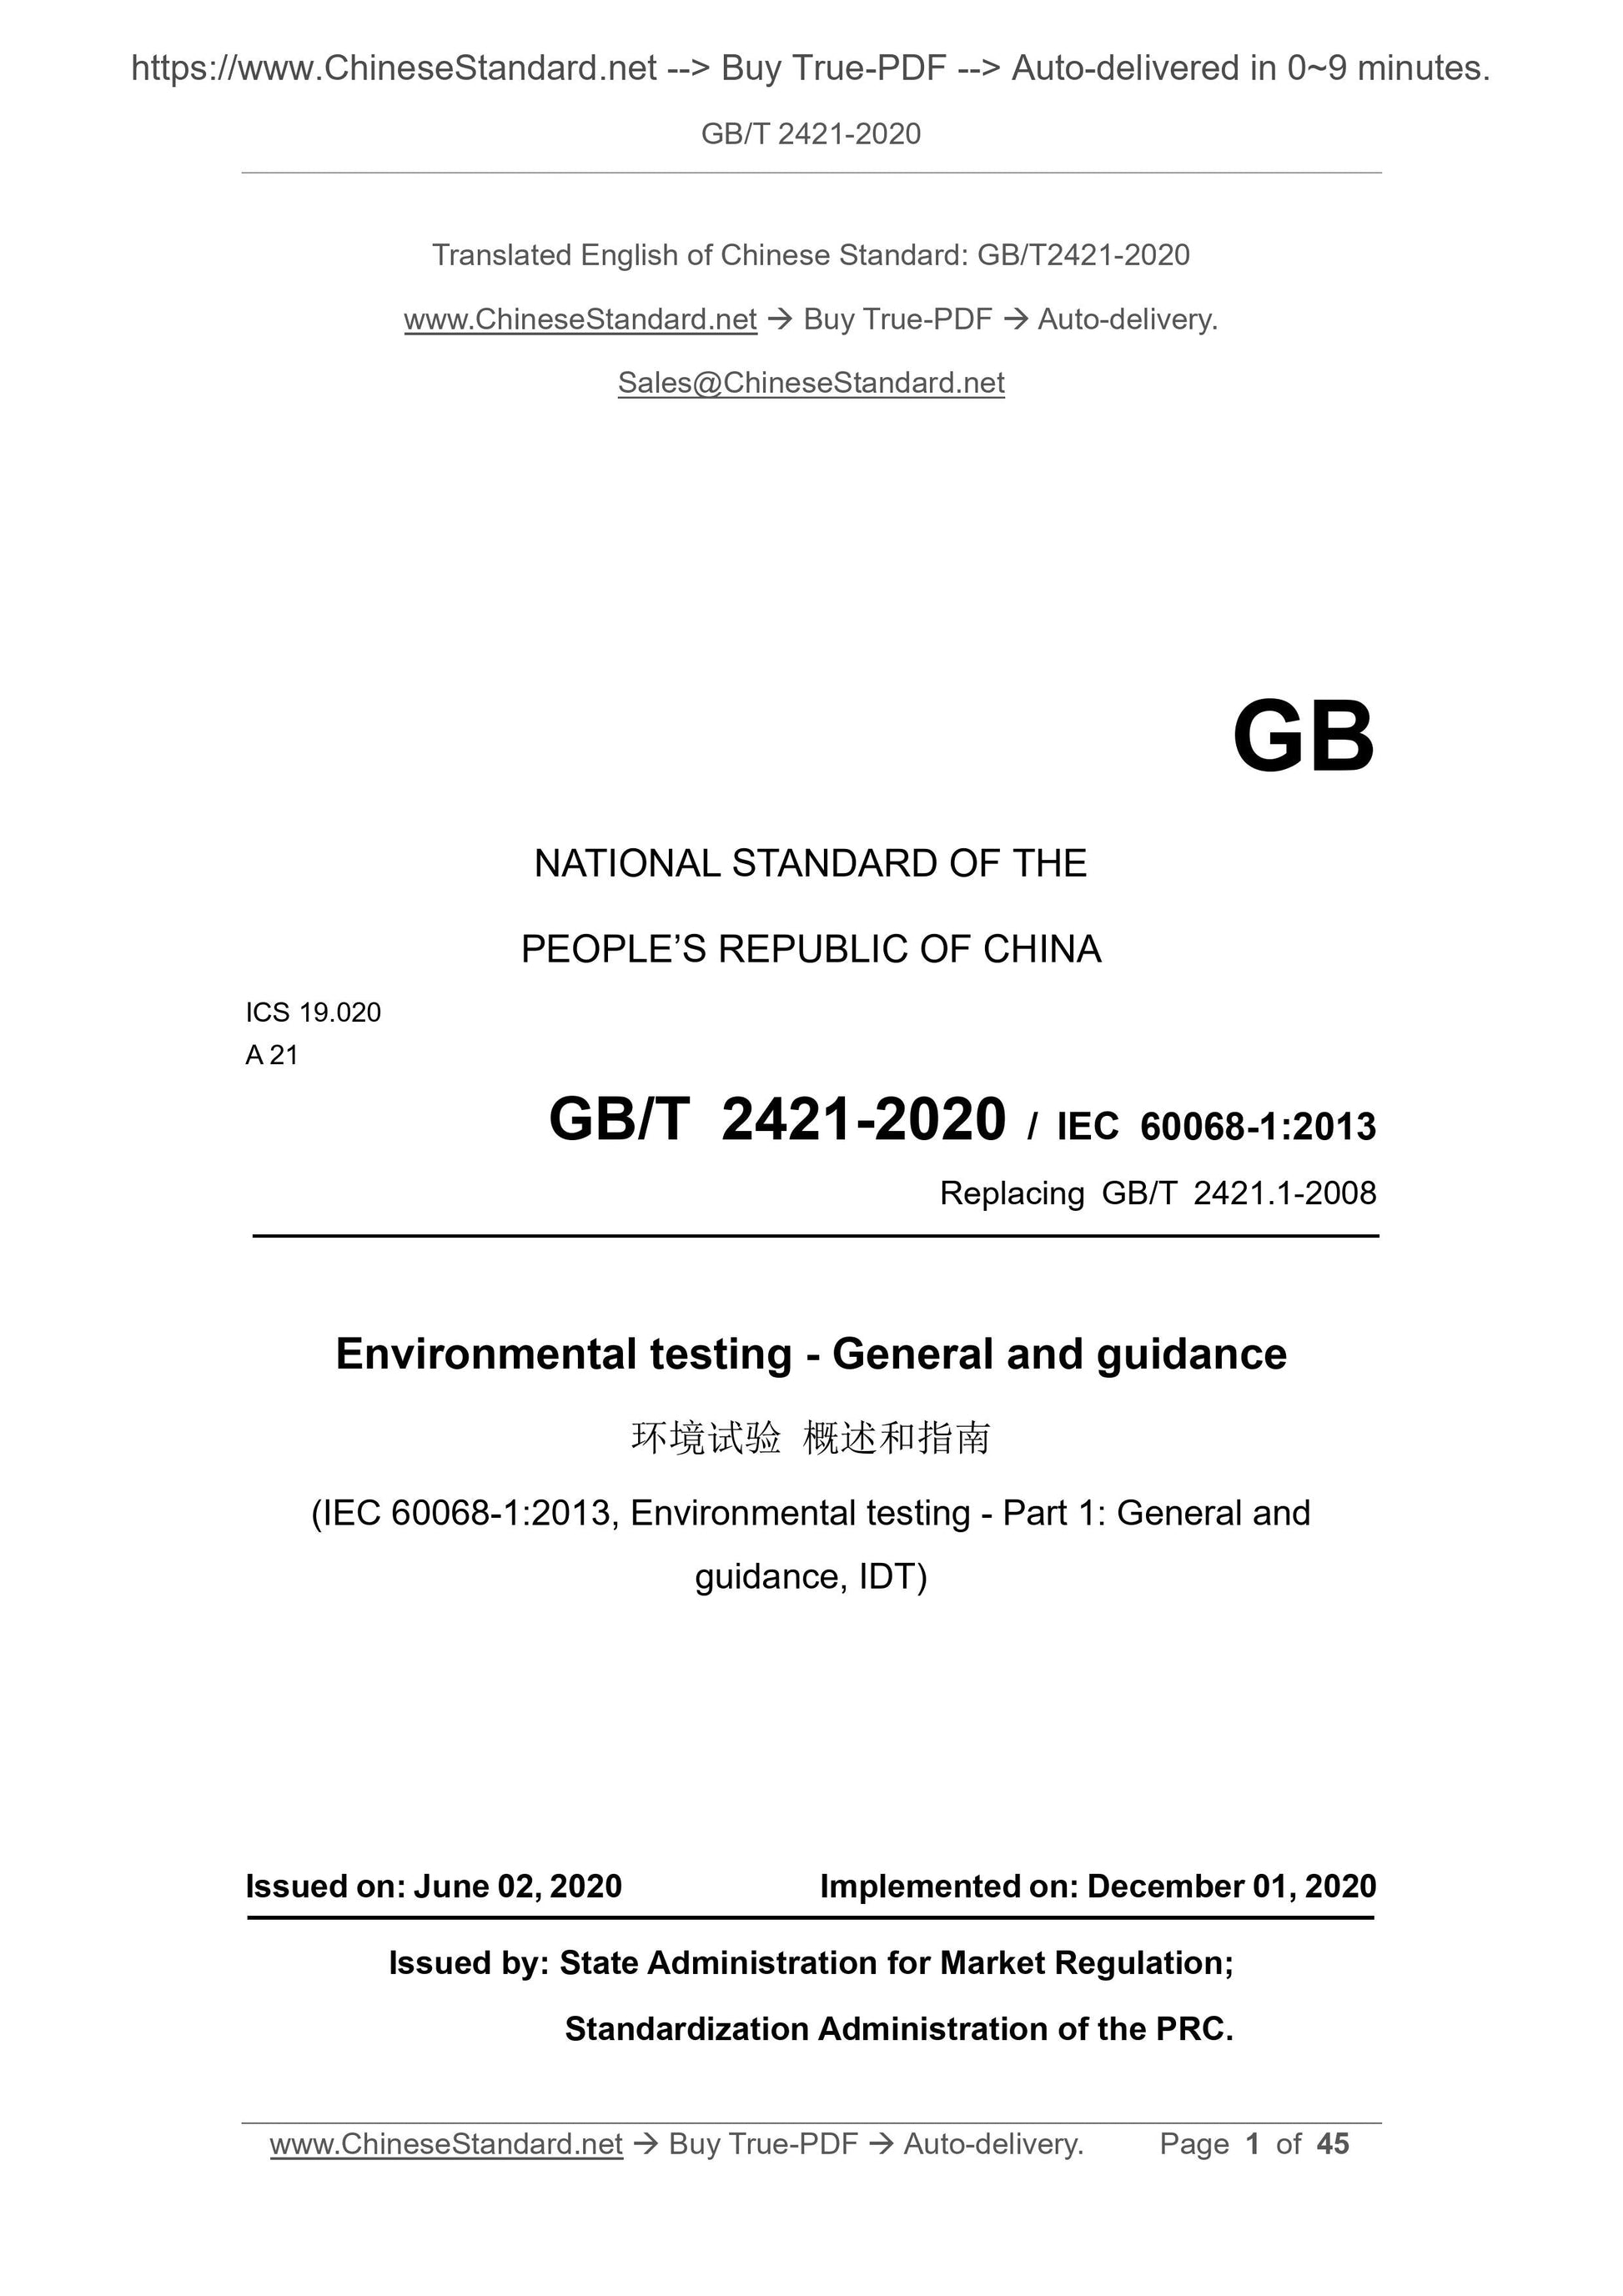 GB/T 2421-2020 Page 1